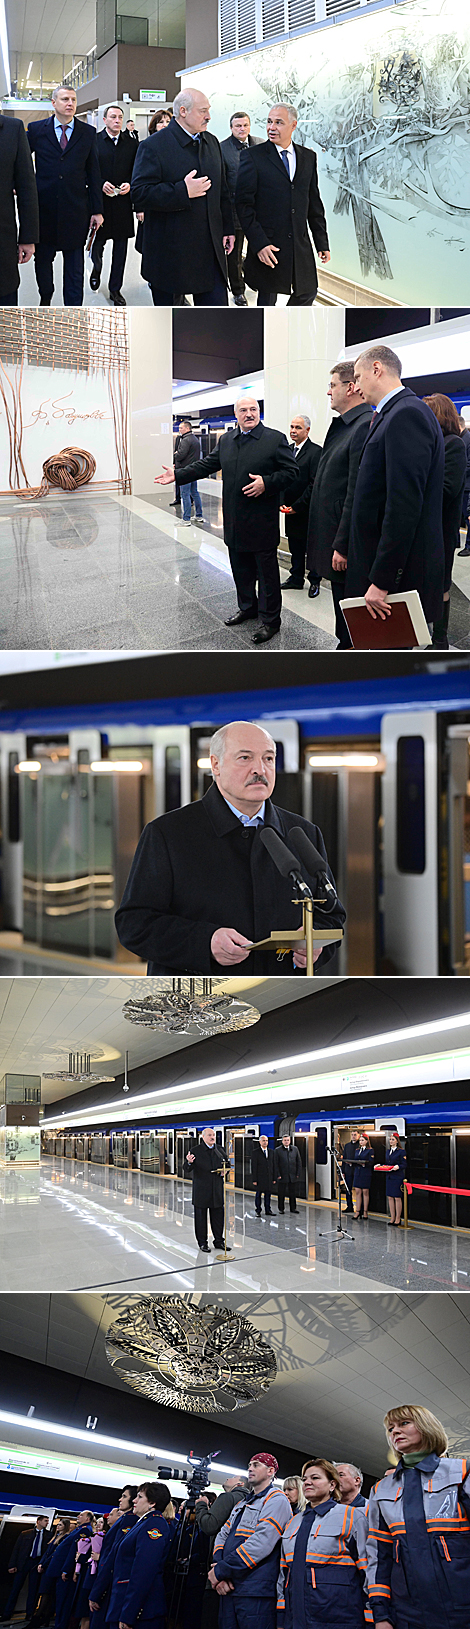 Ceremony to inaugurate the Minsk metro third line